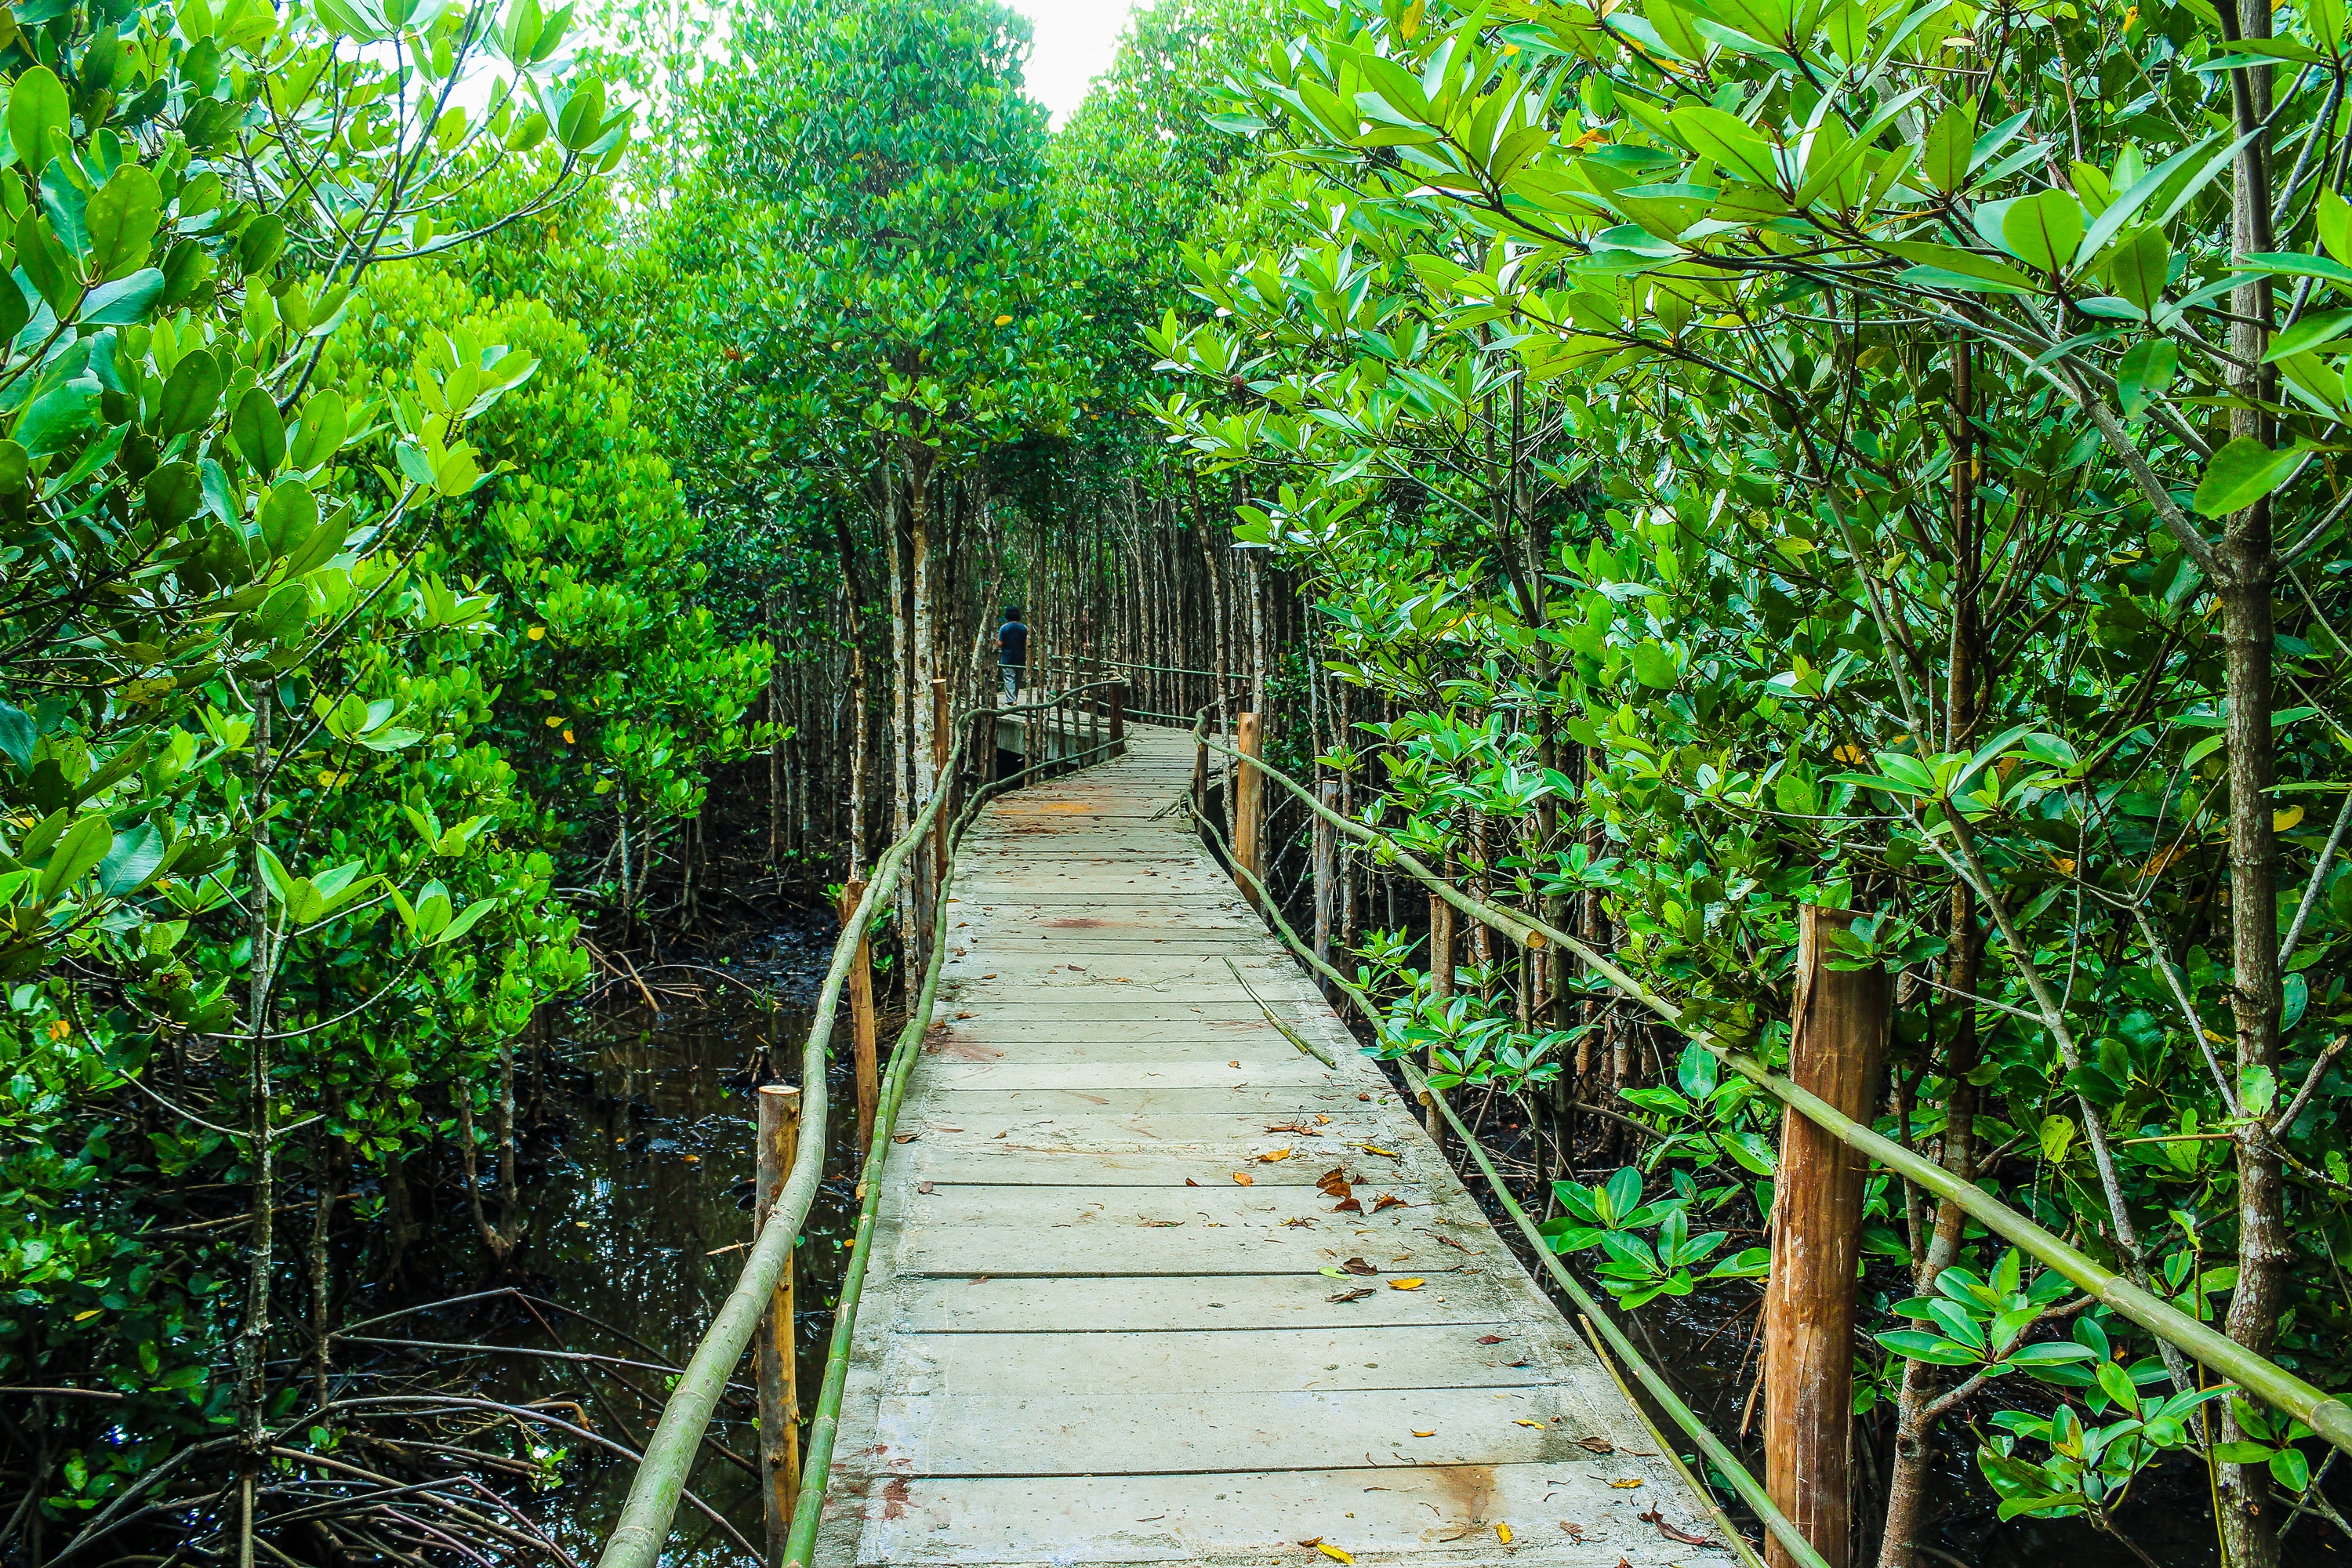 Nature-based solutions may include restoring and conserving mangrove forests and coral reefs to enhance resilience to coastal flooding and sea level risePhoto by icon0.com from Pexels